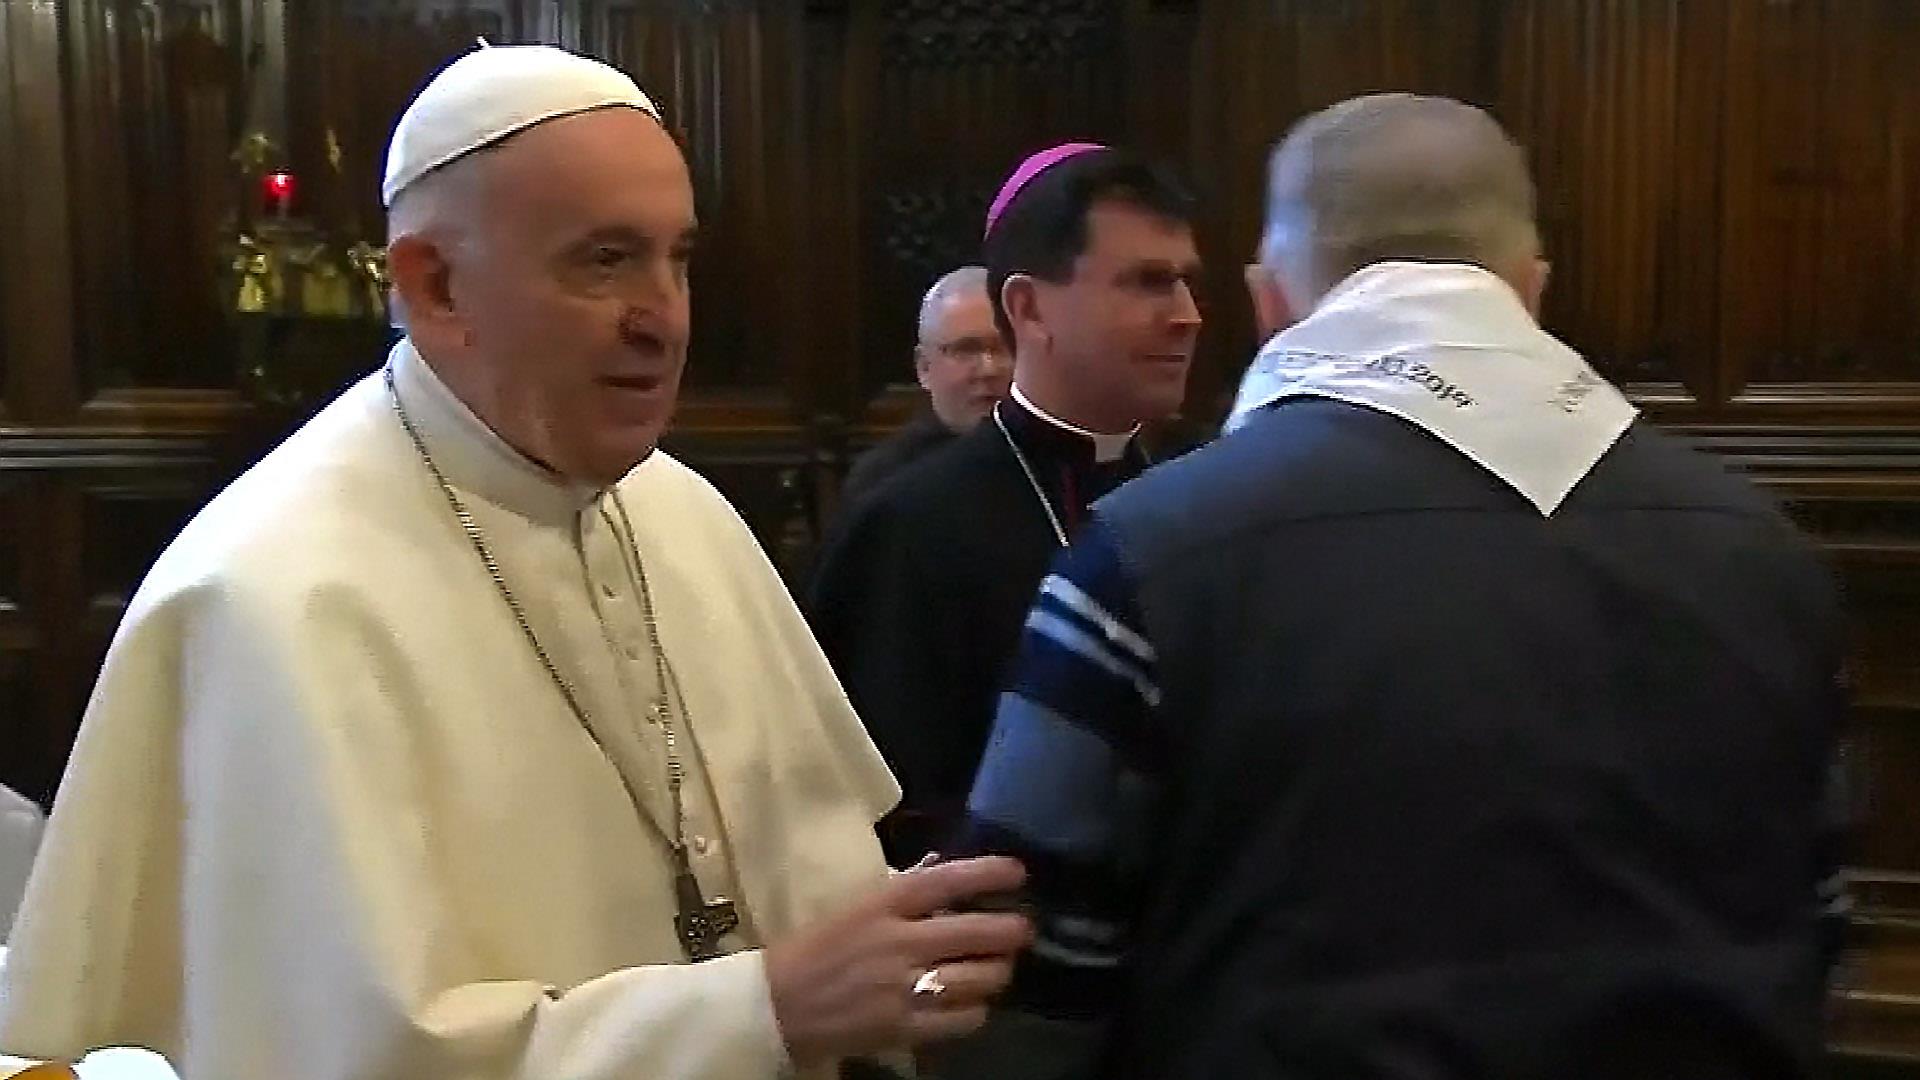 Tektonisch Onmogelijk vliegtuig Pope Francis prevents worshippers from kissing papal ring